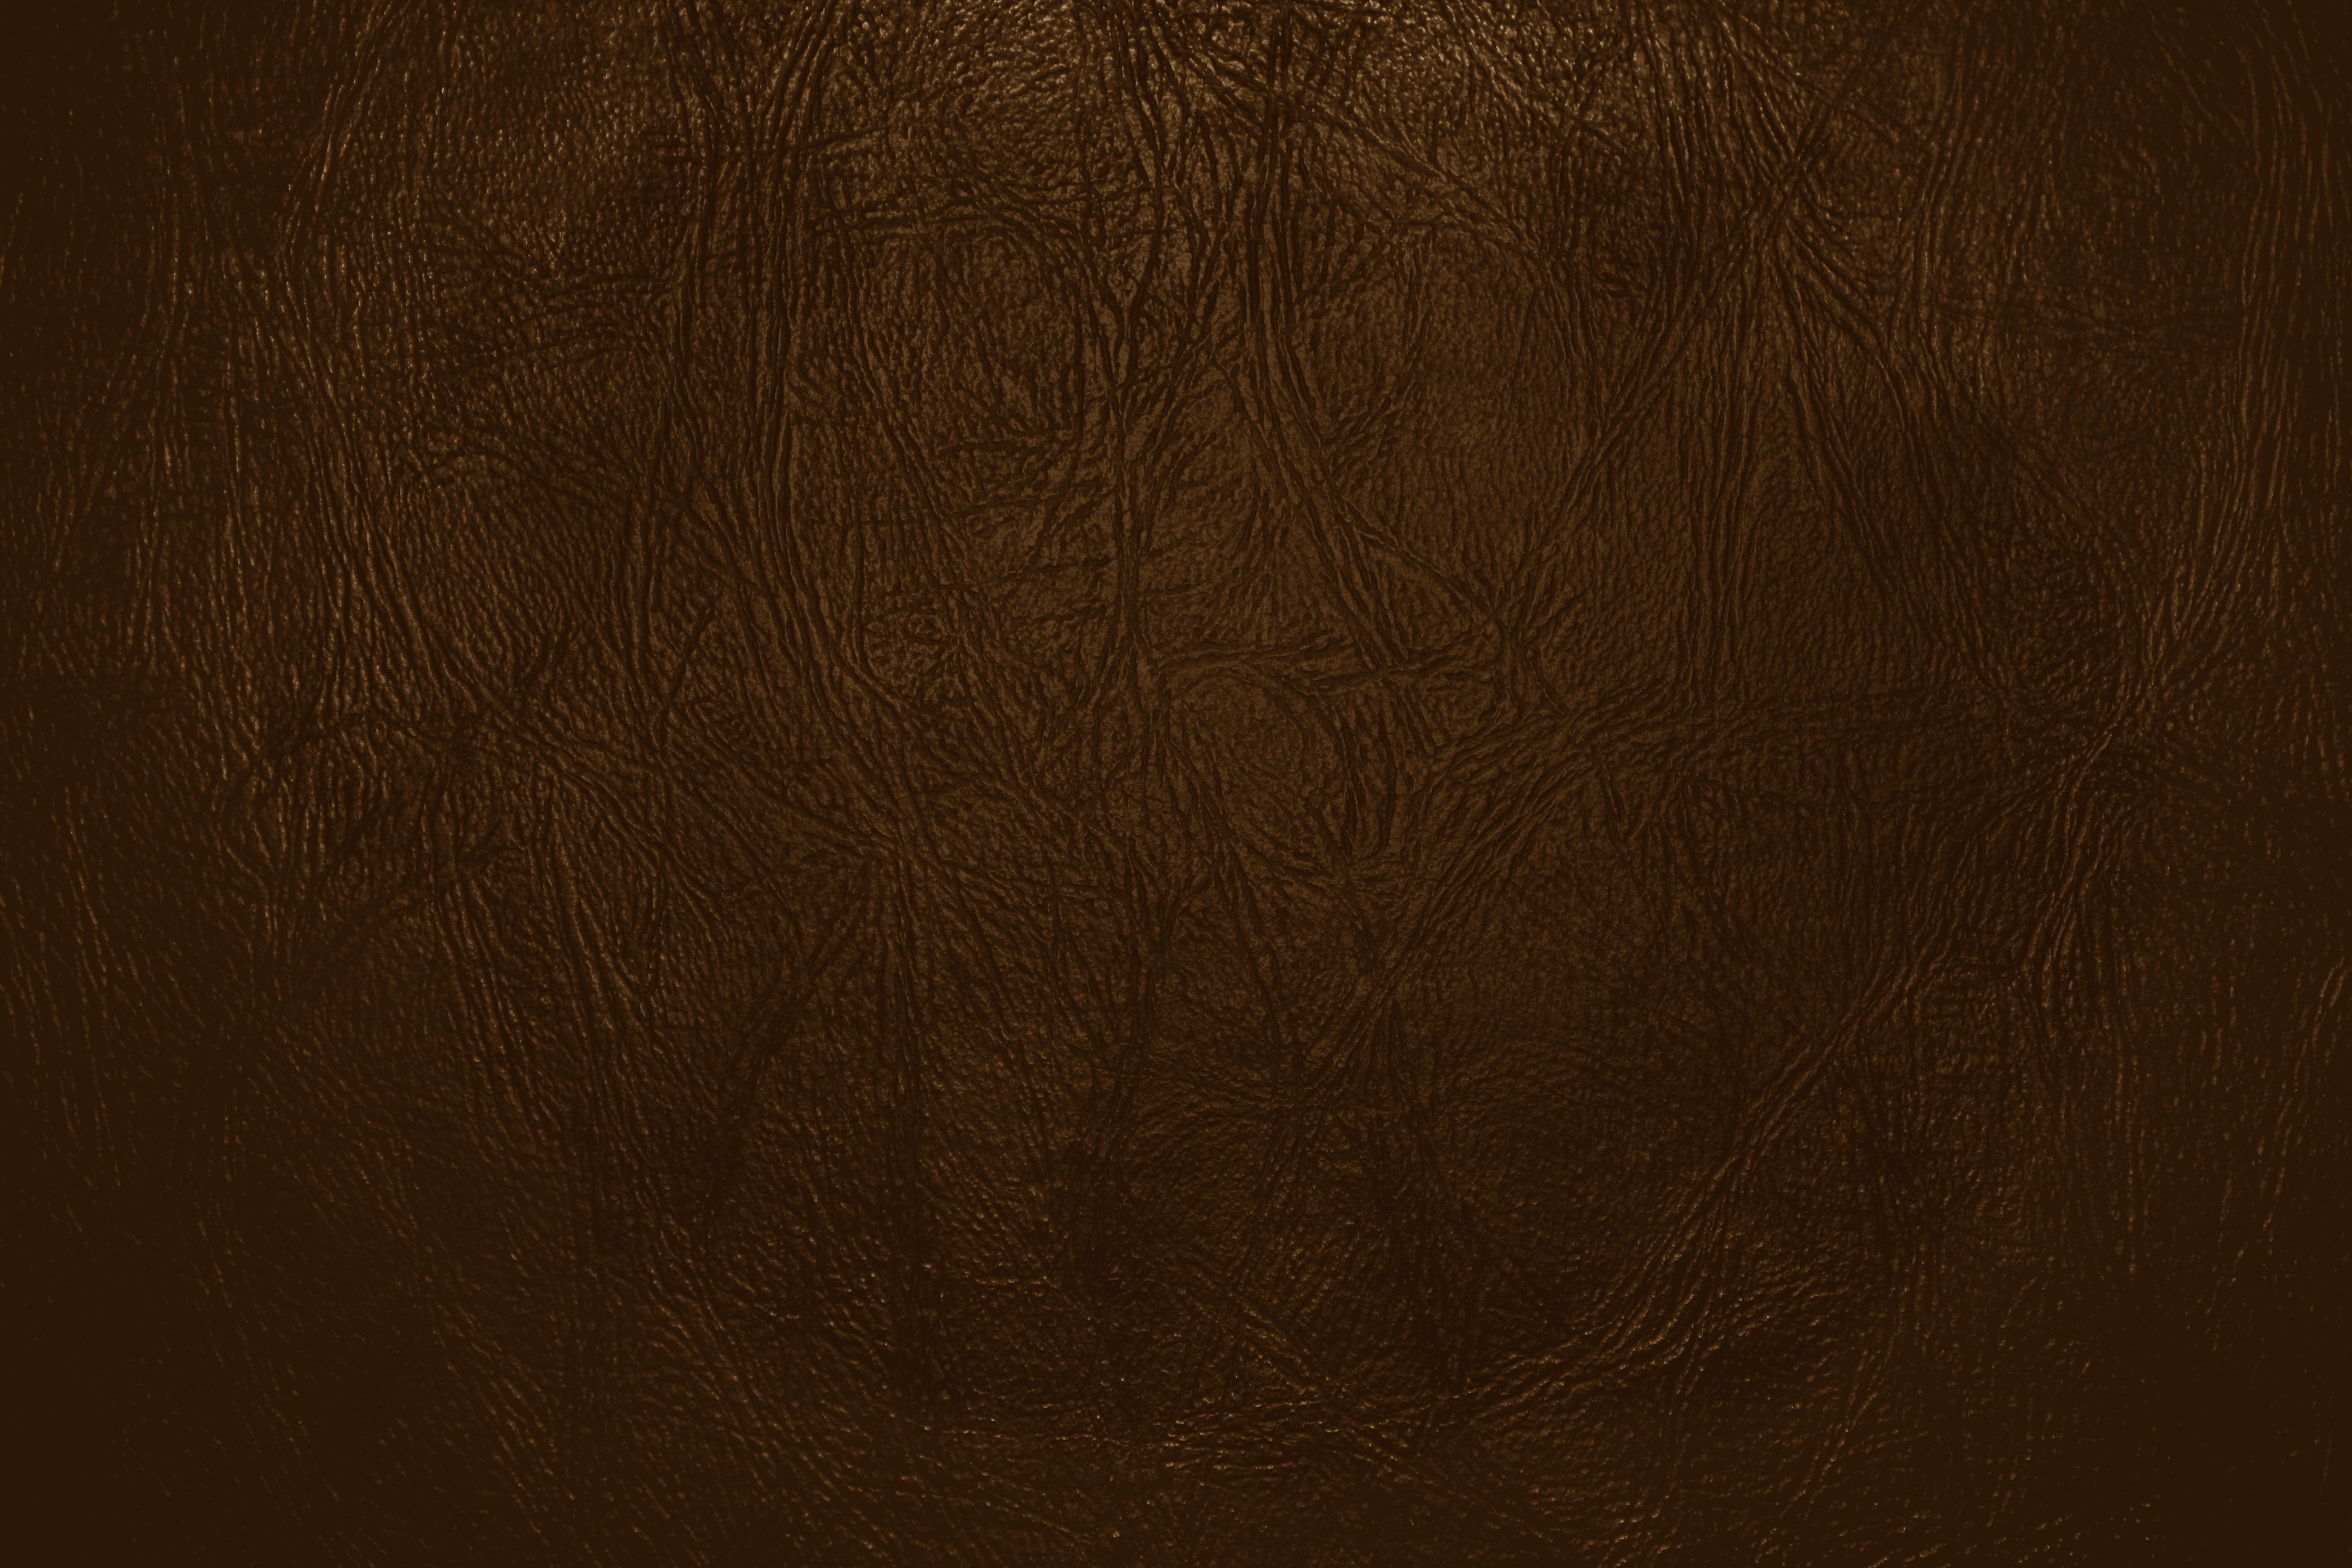 Brown Leather Close Up Texture Picture. Free Photograph. Photo Public Domain